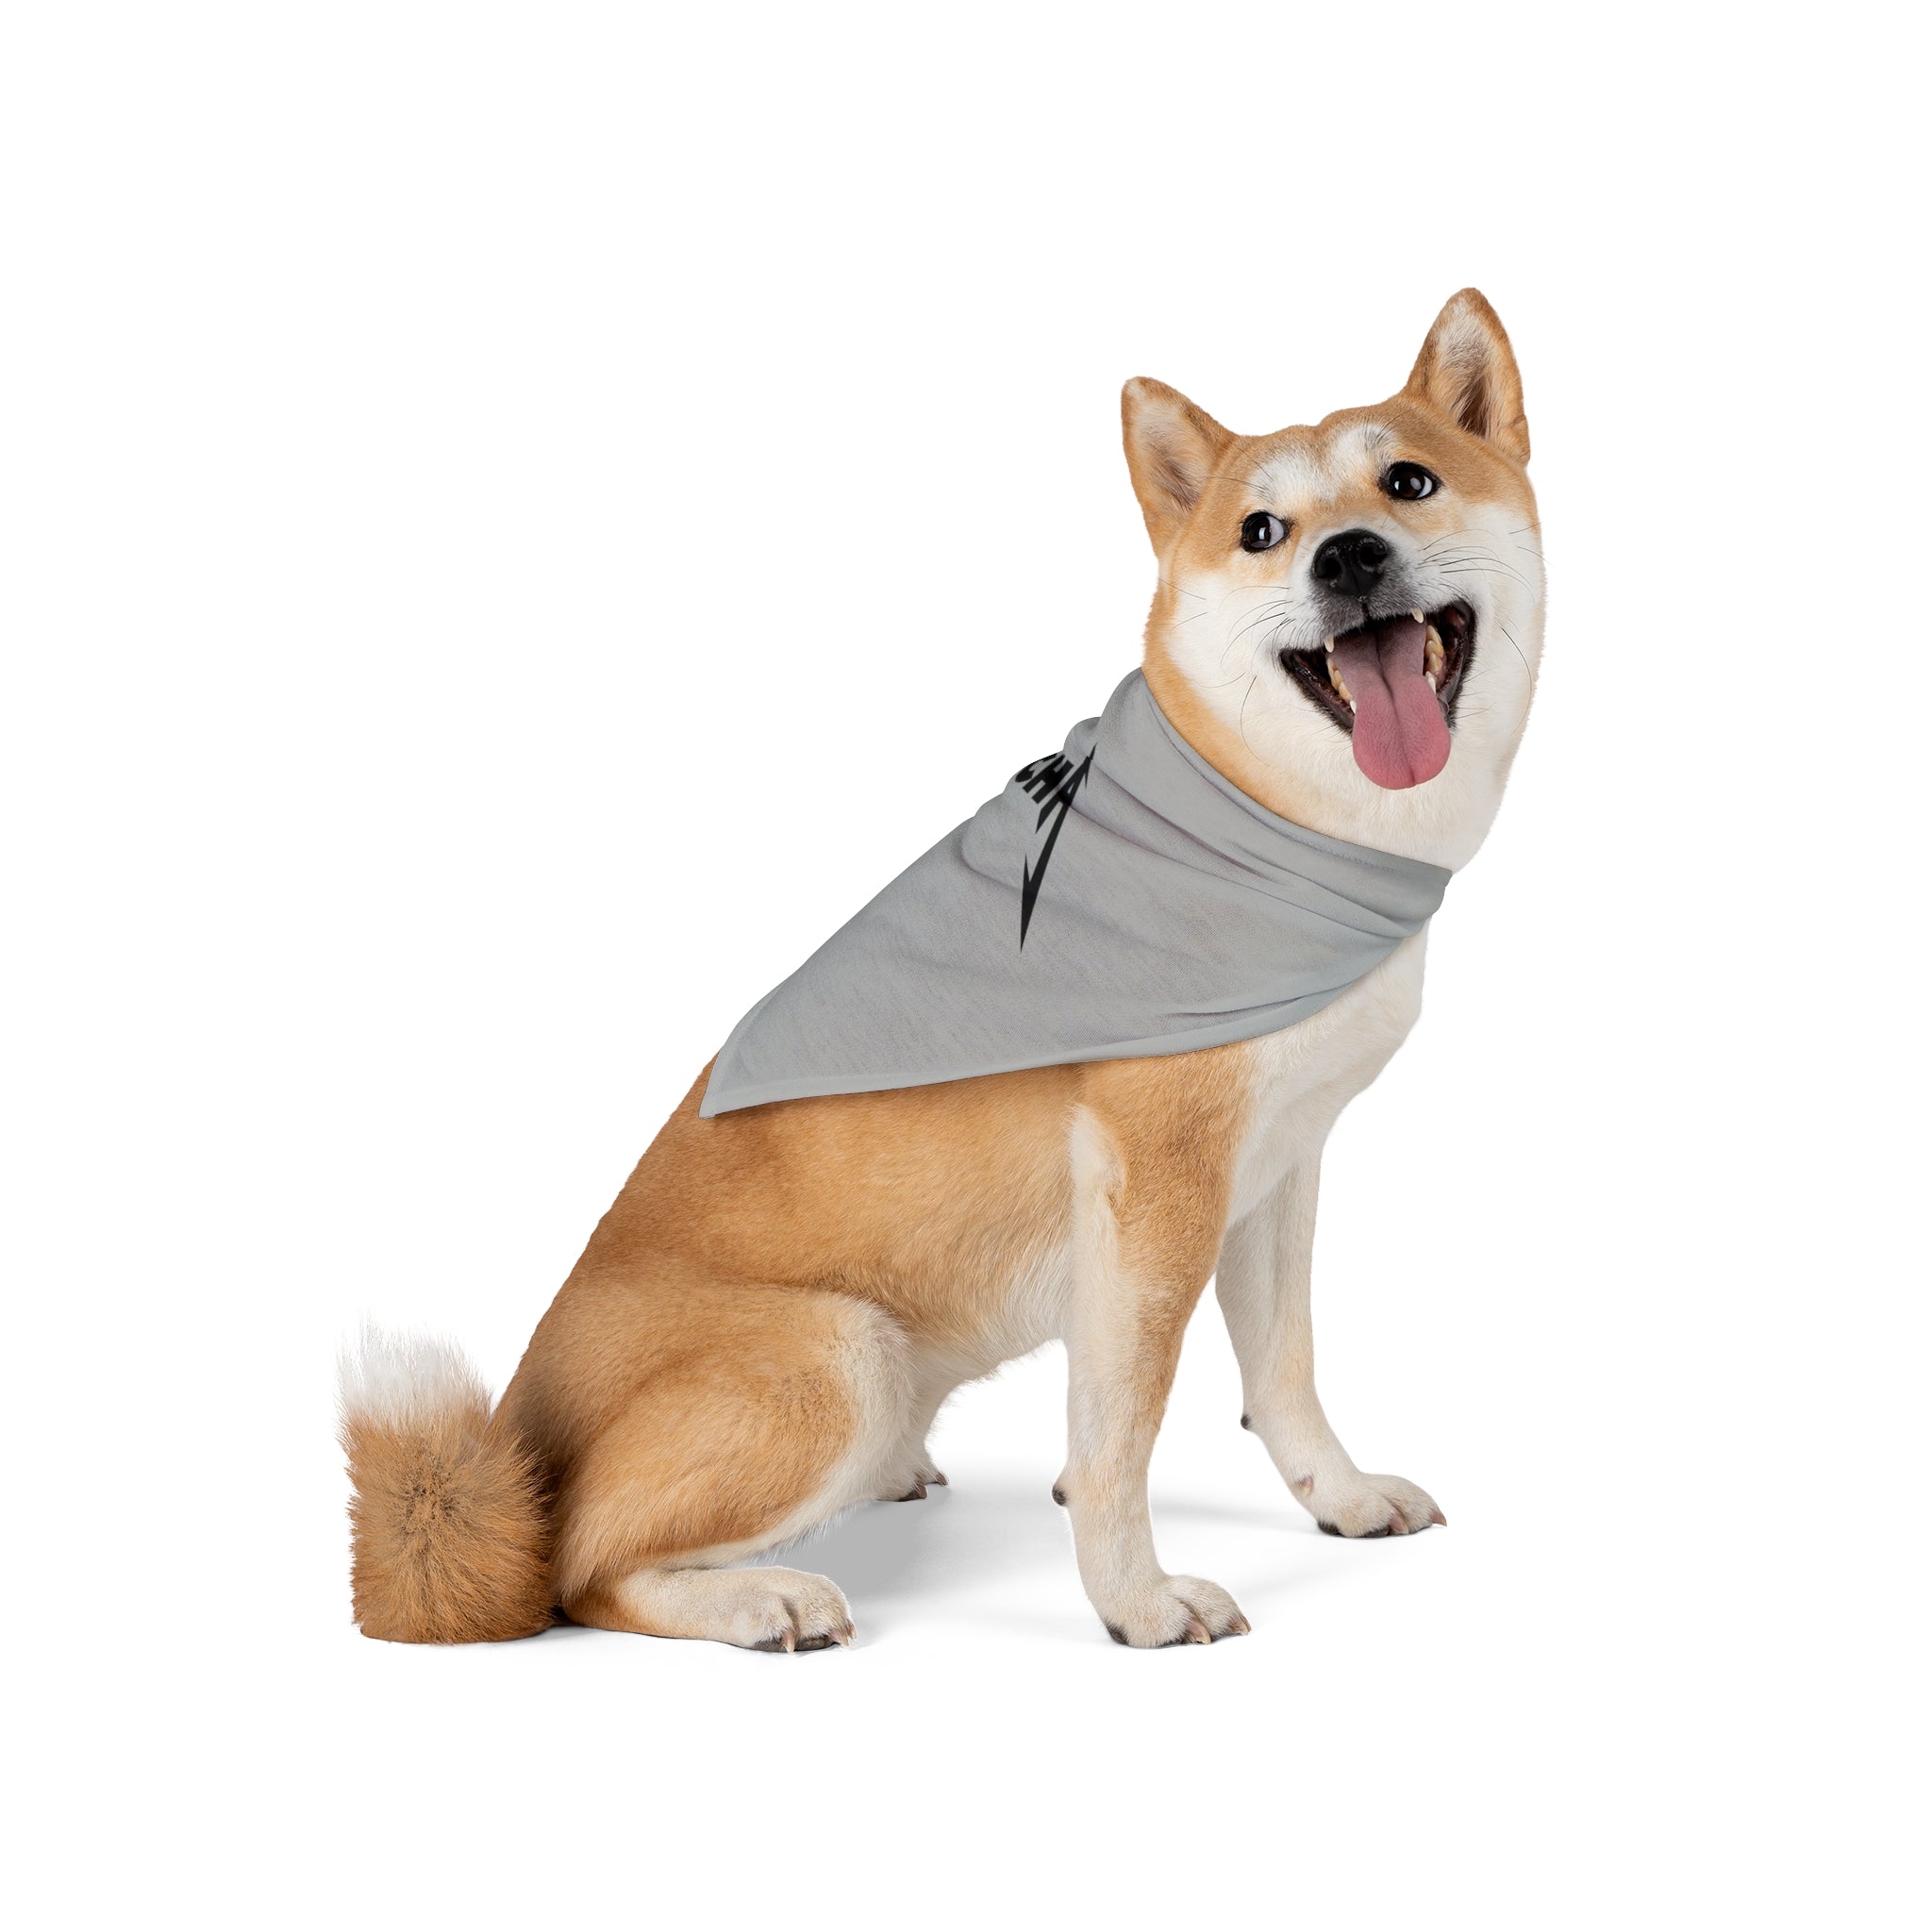 A Shiba Inu dog sits with its mouth open and tongue out, wearing a stylish Mocha - Pet Bandana made of soft-spun polyester. Its ears are perked up, and it has a bushy tail. The background is plain white.